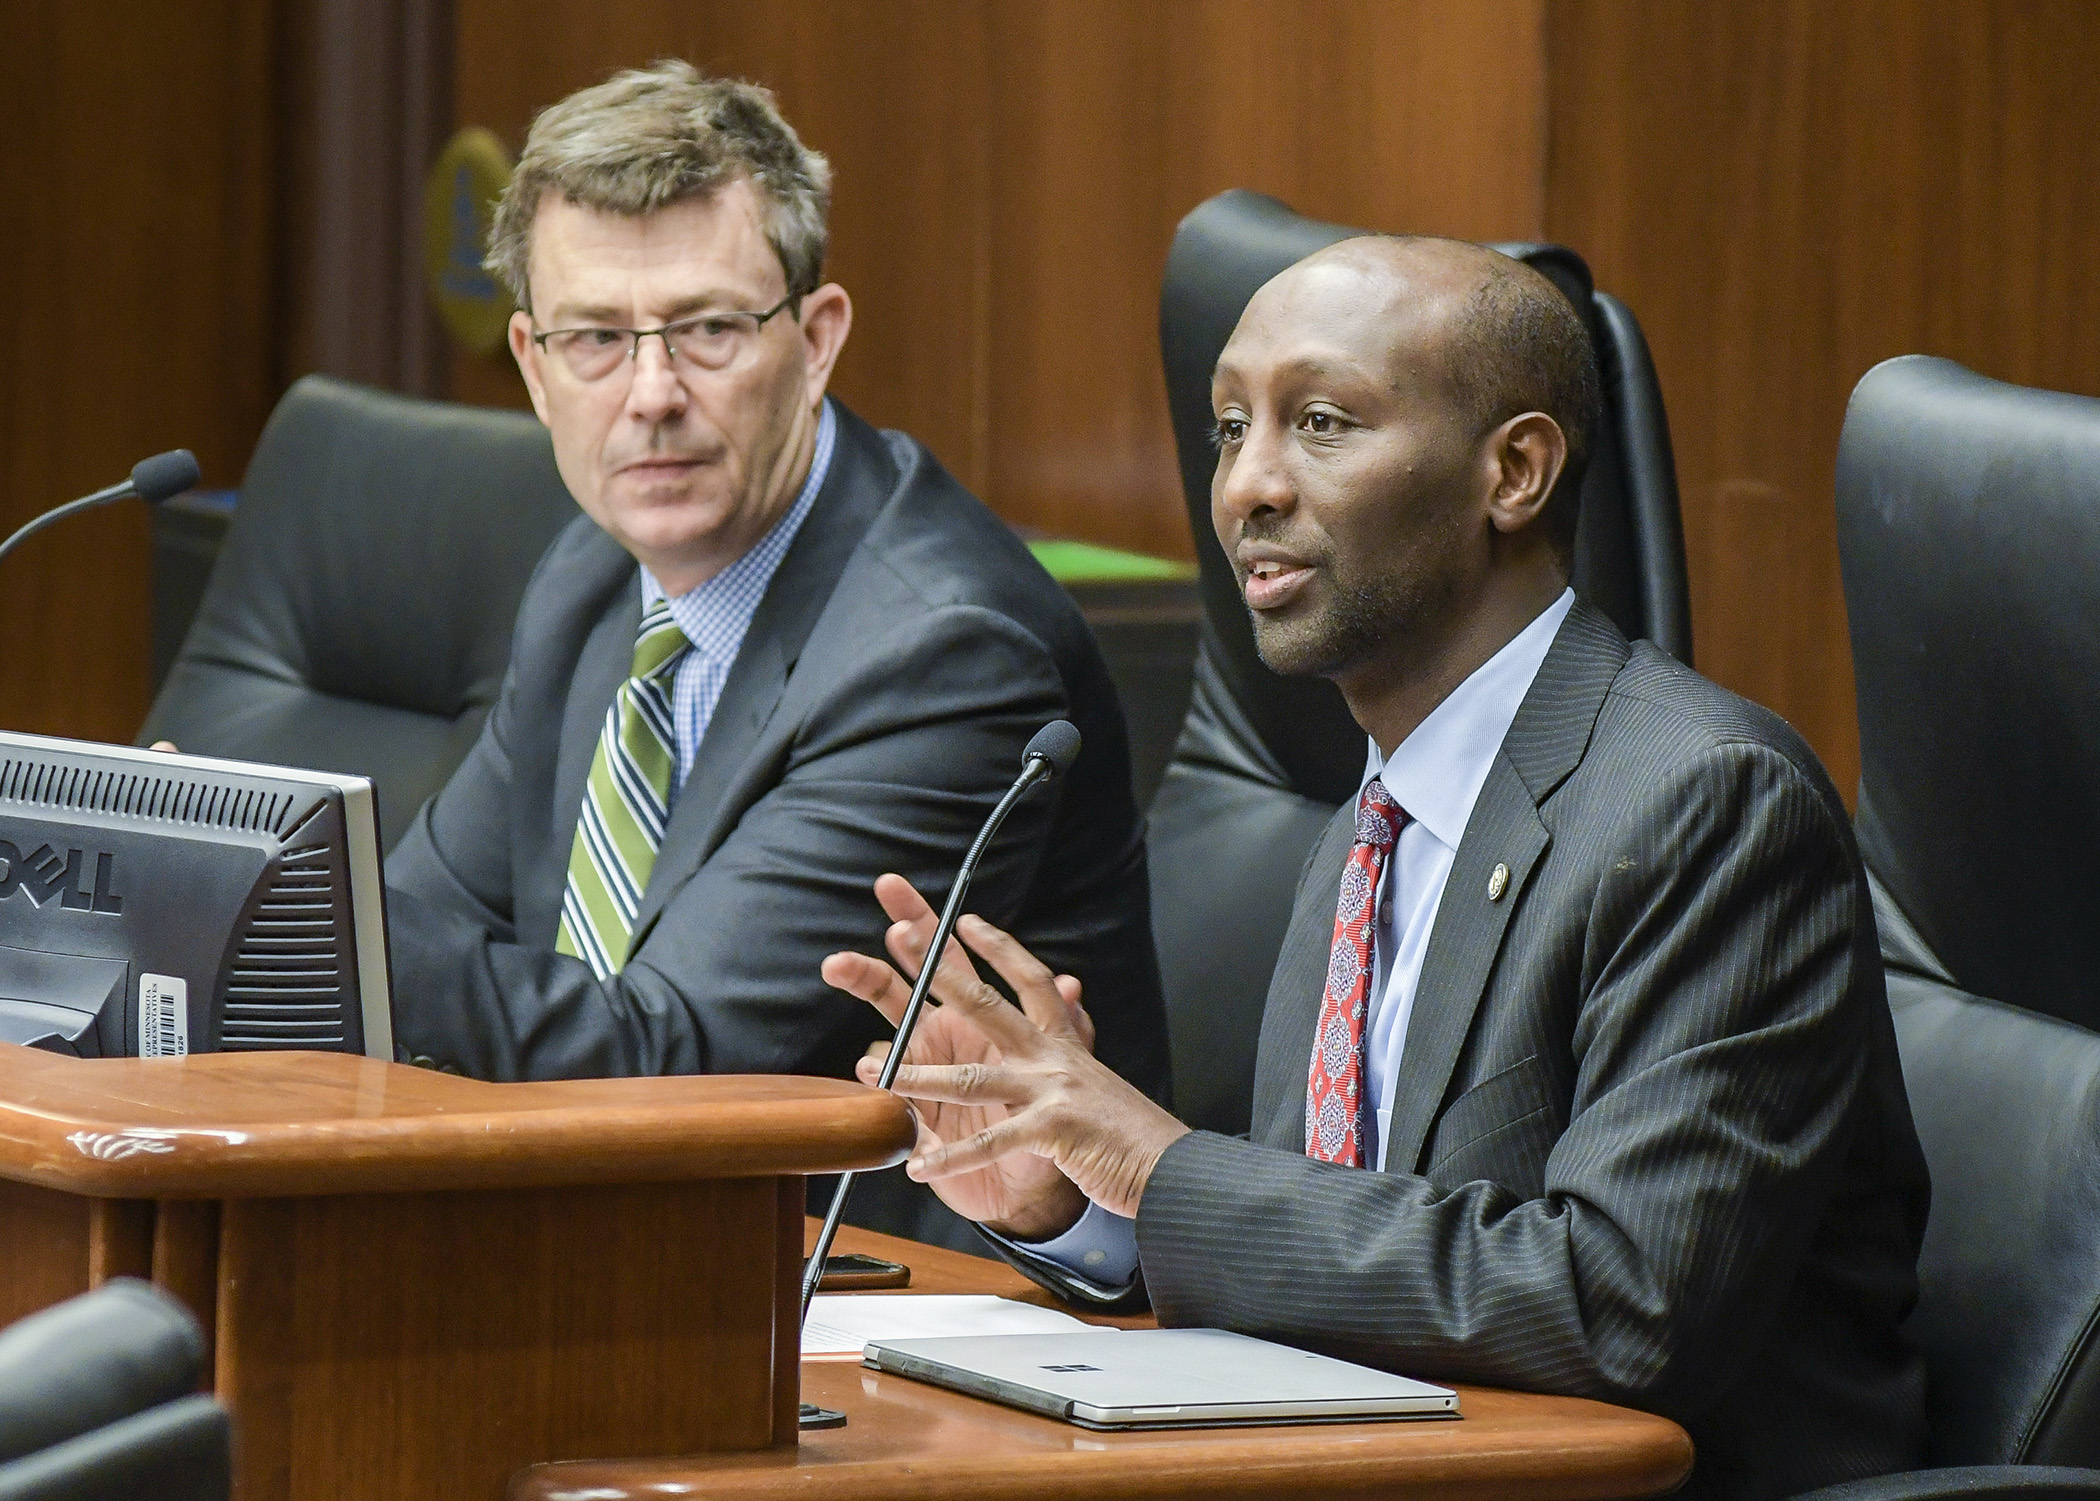 Hennepin County Commissioner Mike Opat listens as Rep. Mohamud Noor testifies before the House Health and Human Services Finance Division on a bill that would provide funding for foster families recruitment in Hennepin County. Photo by Andrew VonBank